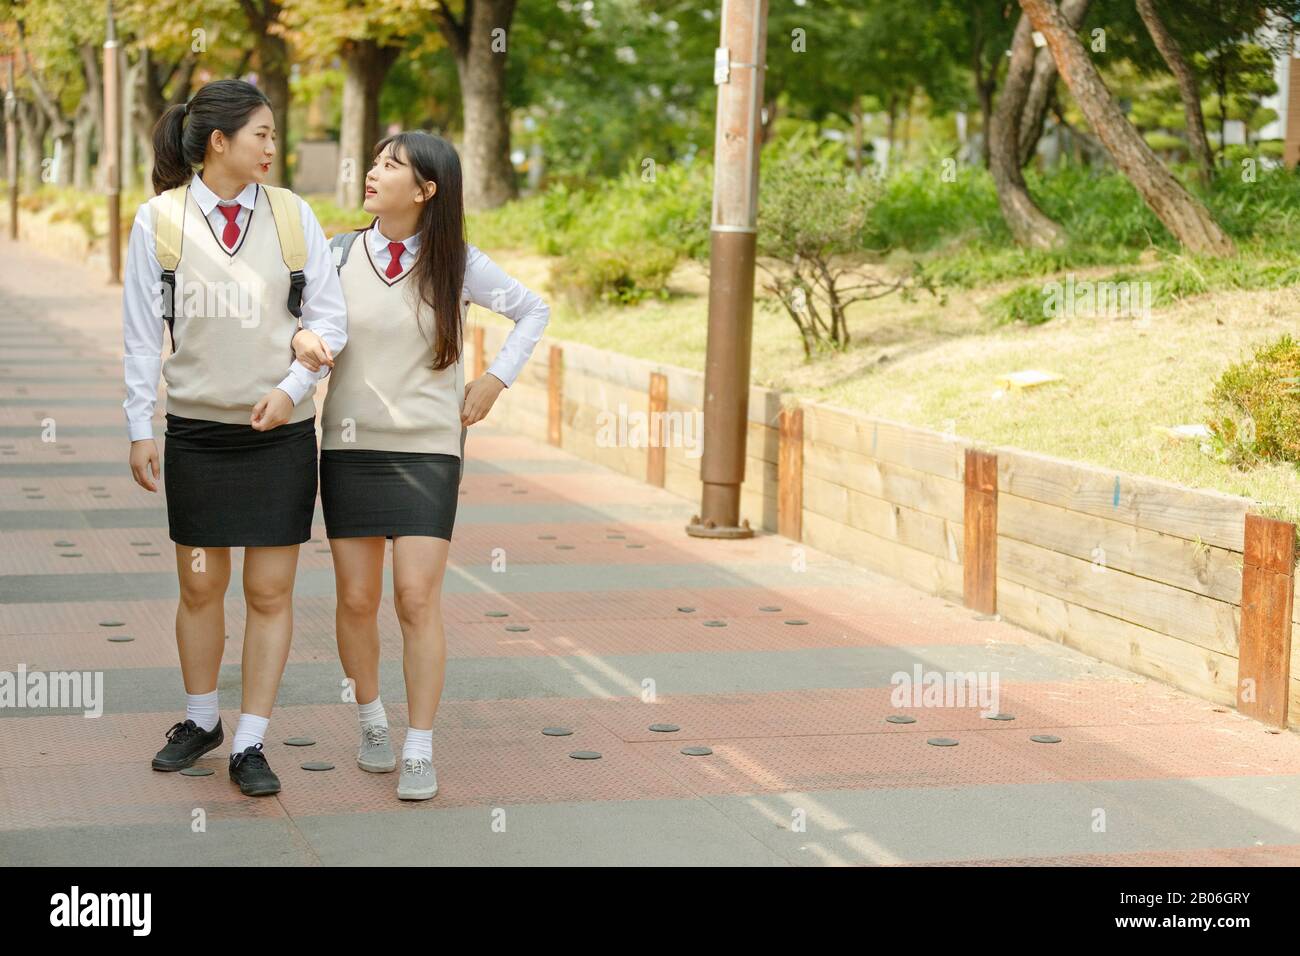 High school student's daily life, Asian teenage students wearing uniform on college with friends 269 Stock Photo